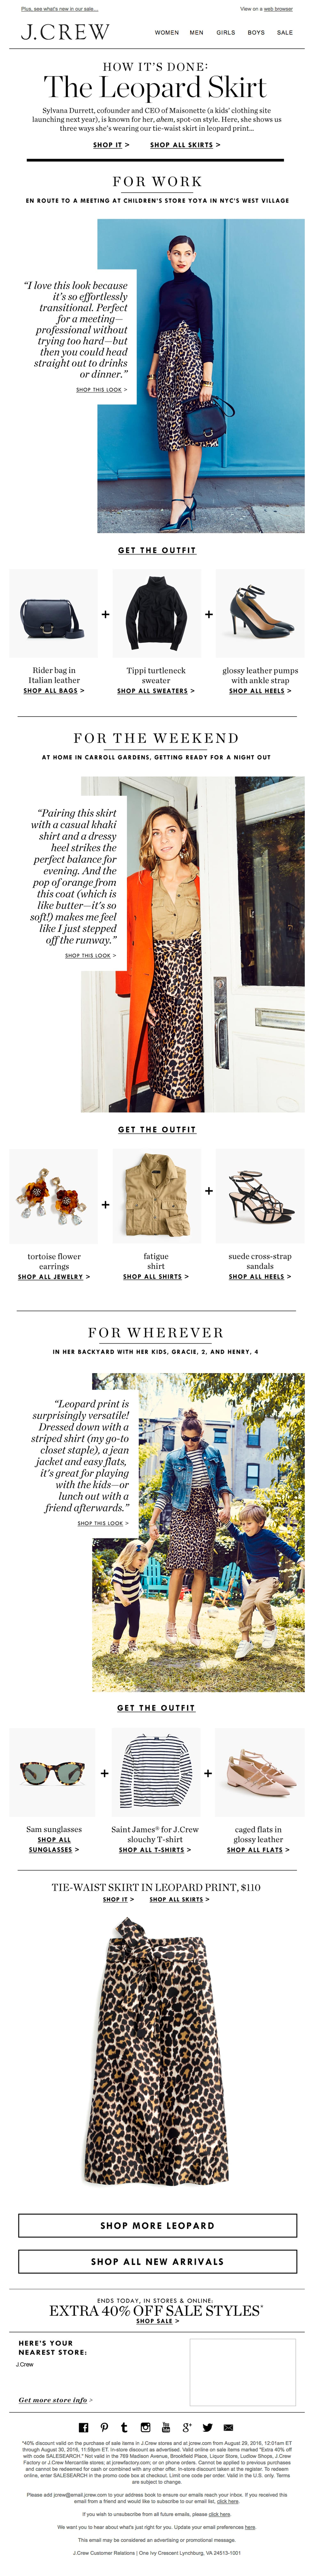 J.Crew email featuring a middle influencer